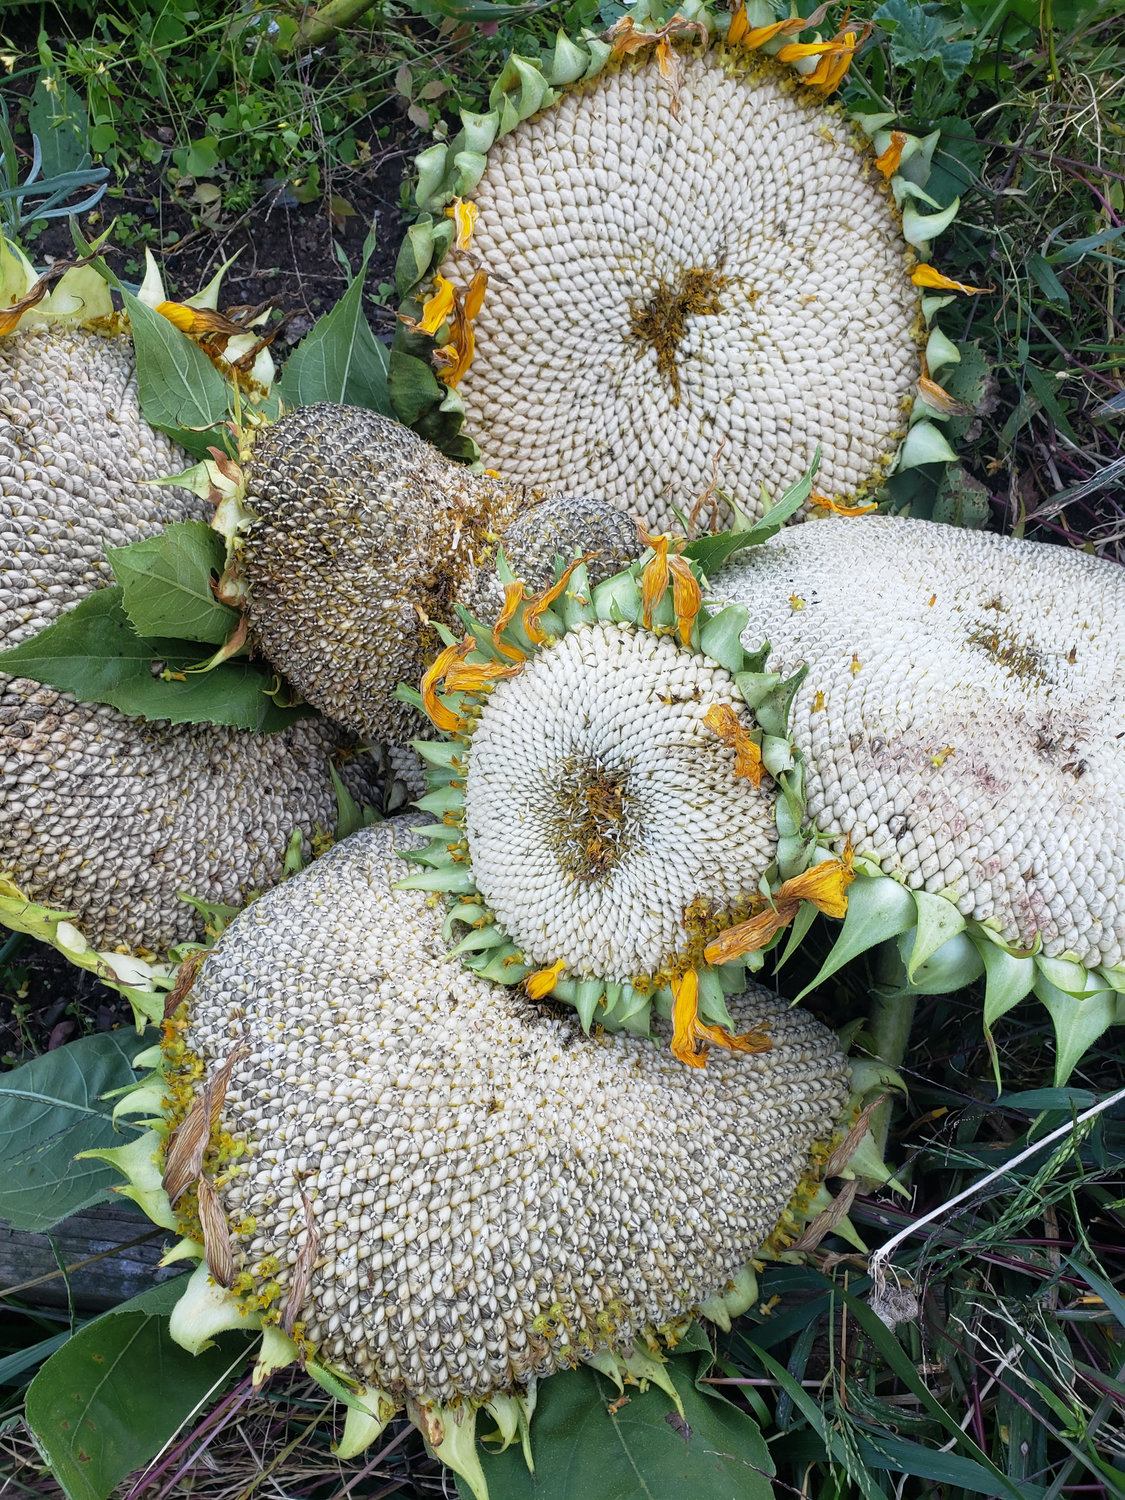 Collected sunflower heads ready for seed removal.